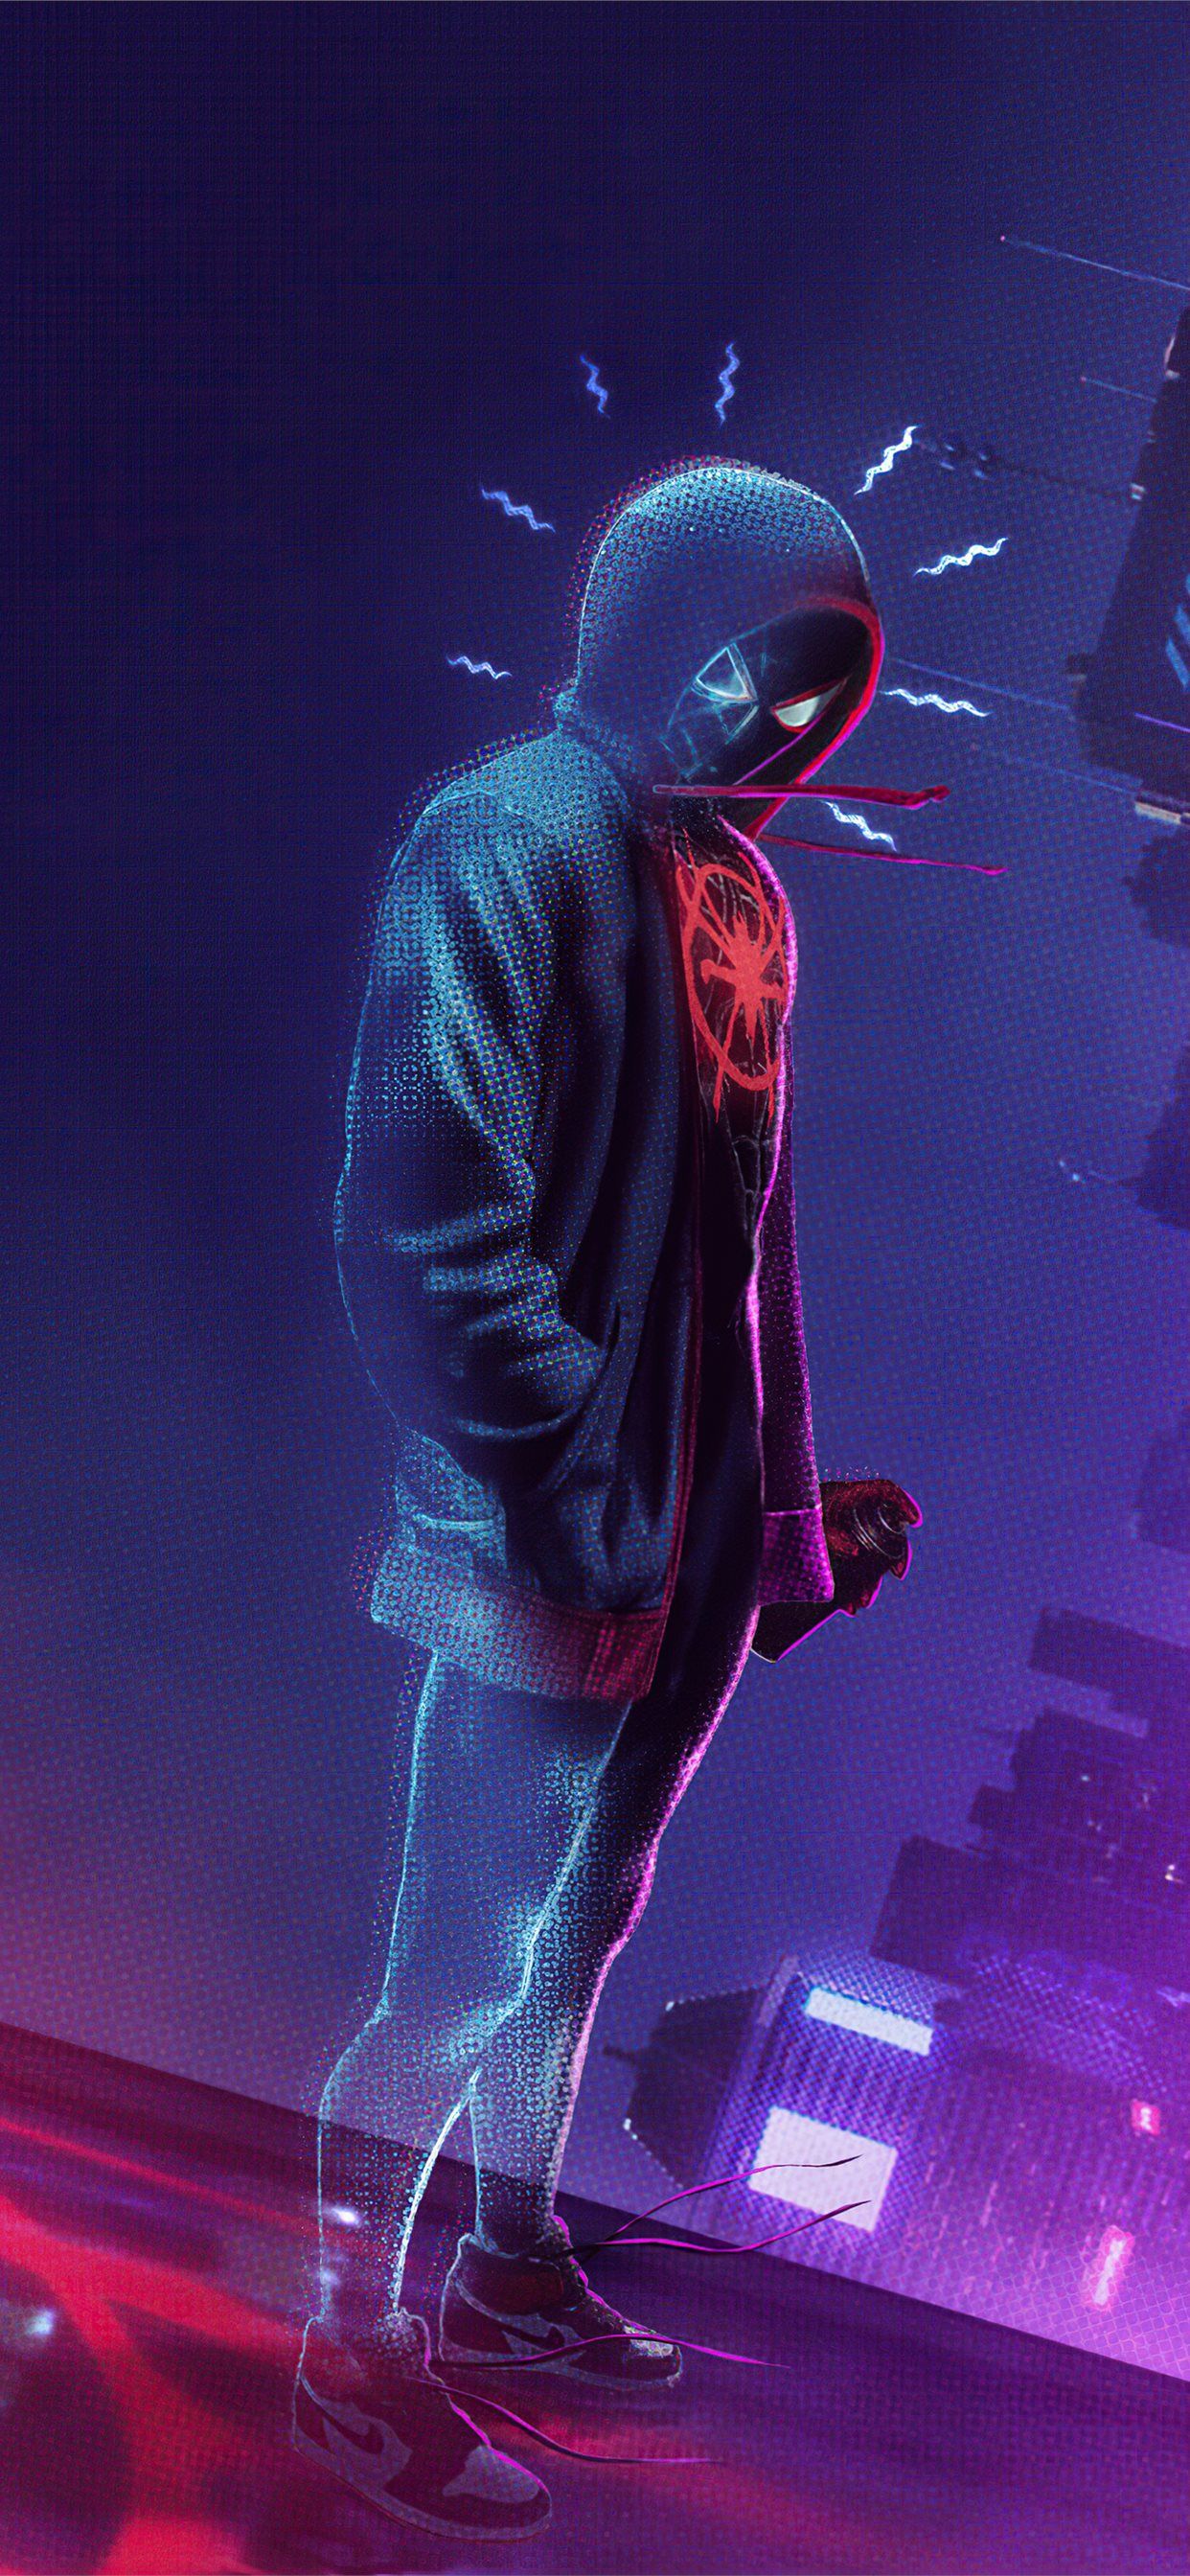 spider man miles morales noise iPhone X Wallpaper Free Download